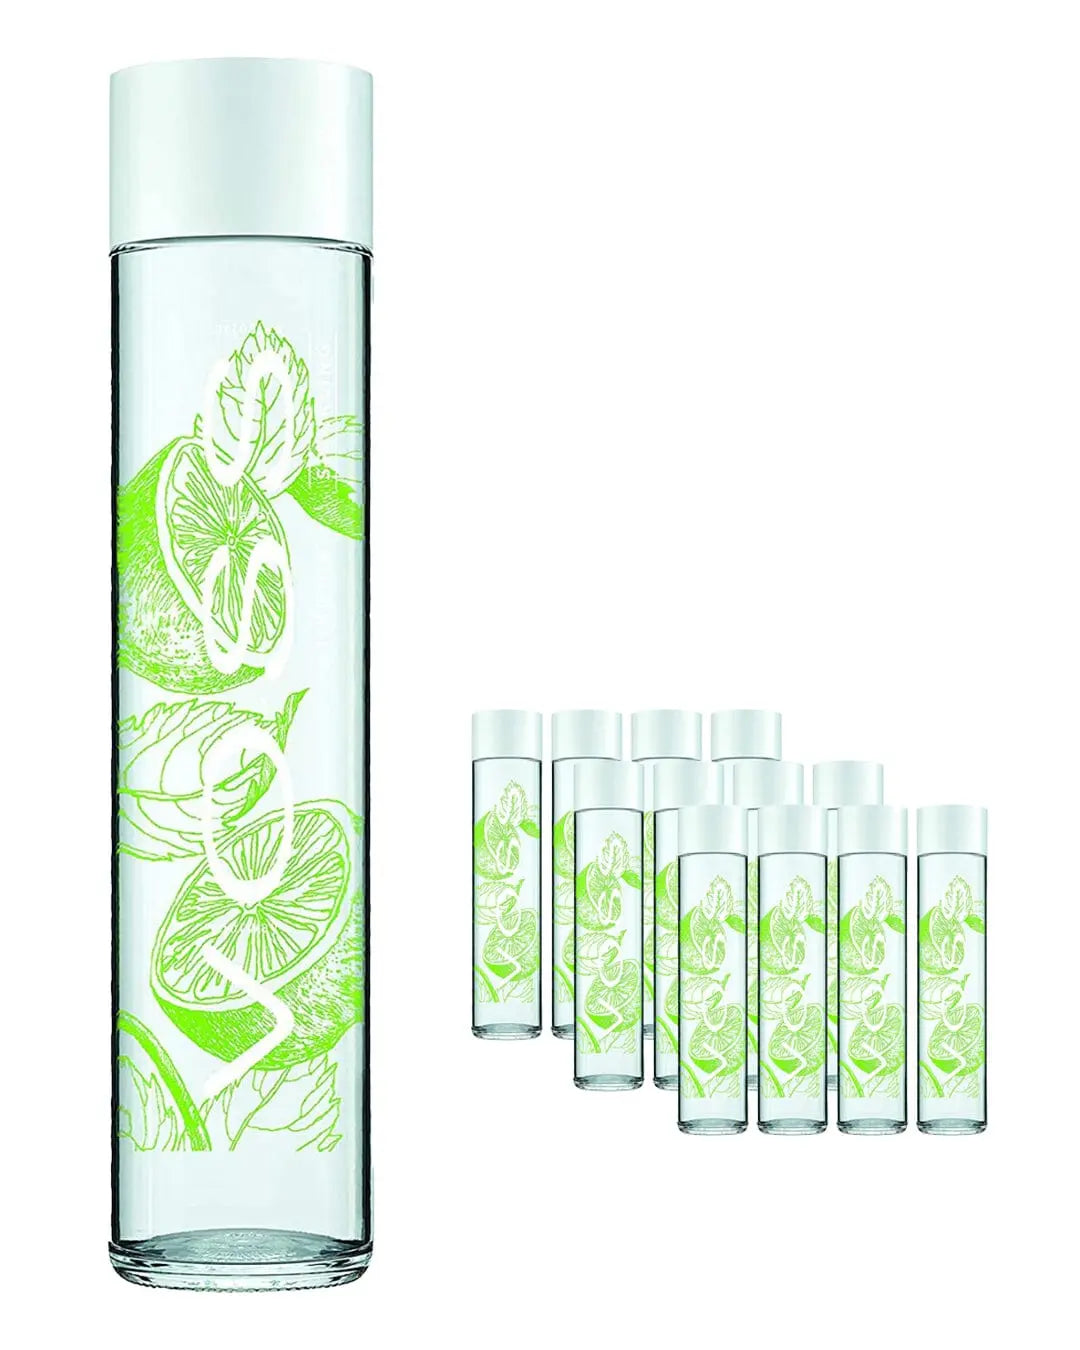 Voss Lime Mint Sparkling Water Glass Bottle Multipack, 12 x 375 ml Water